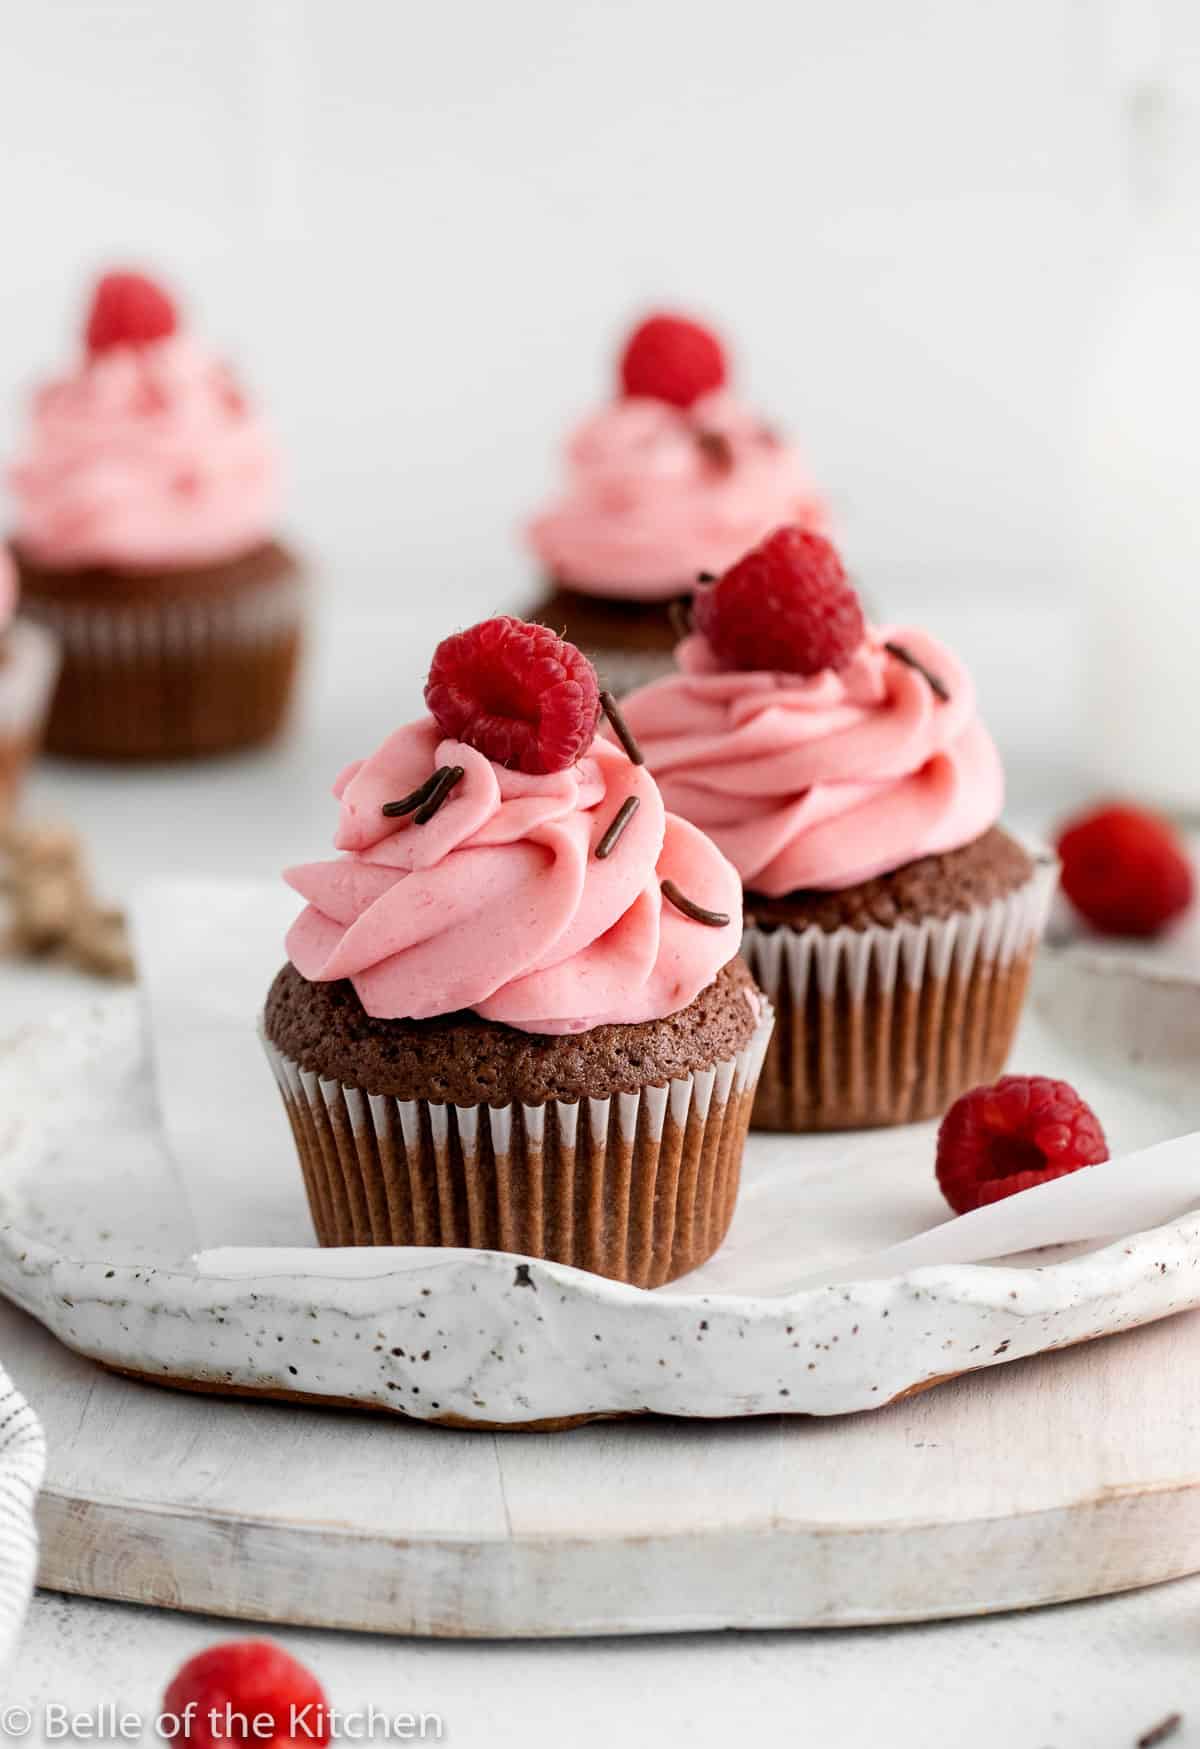 two cupcakes on a plate with raspberries on top.